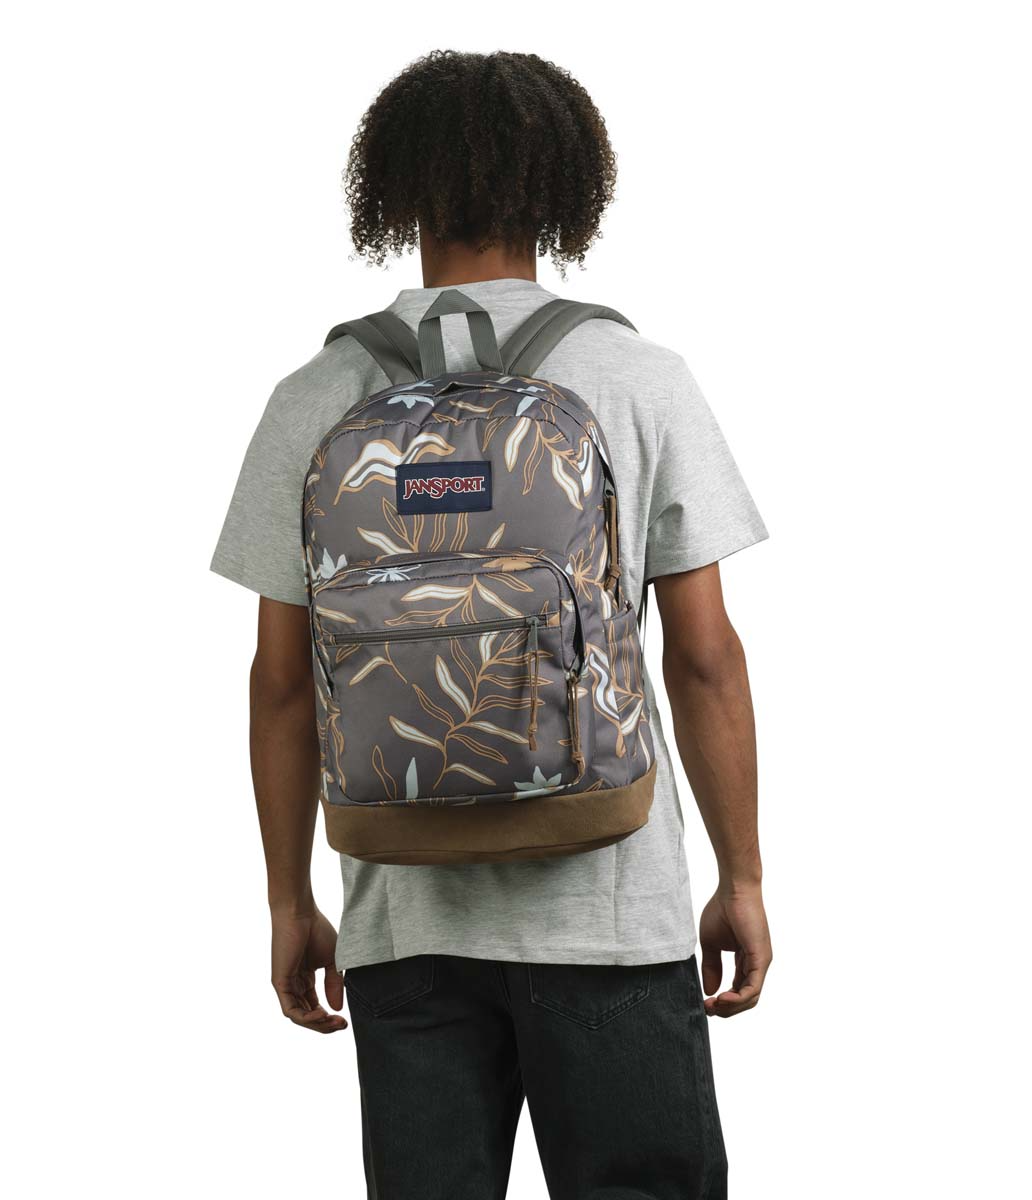 JanSport Right Pack Vacay Vibes Grey